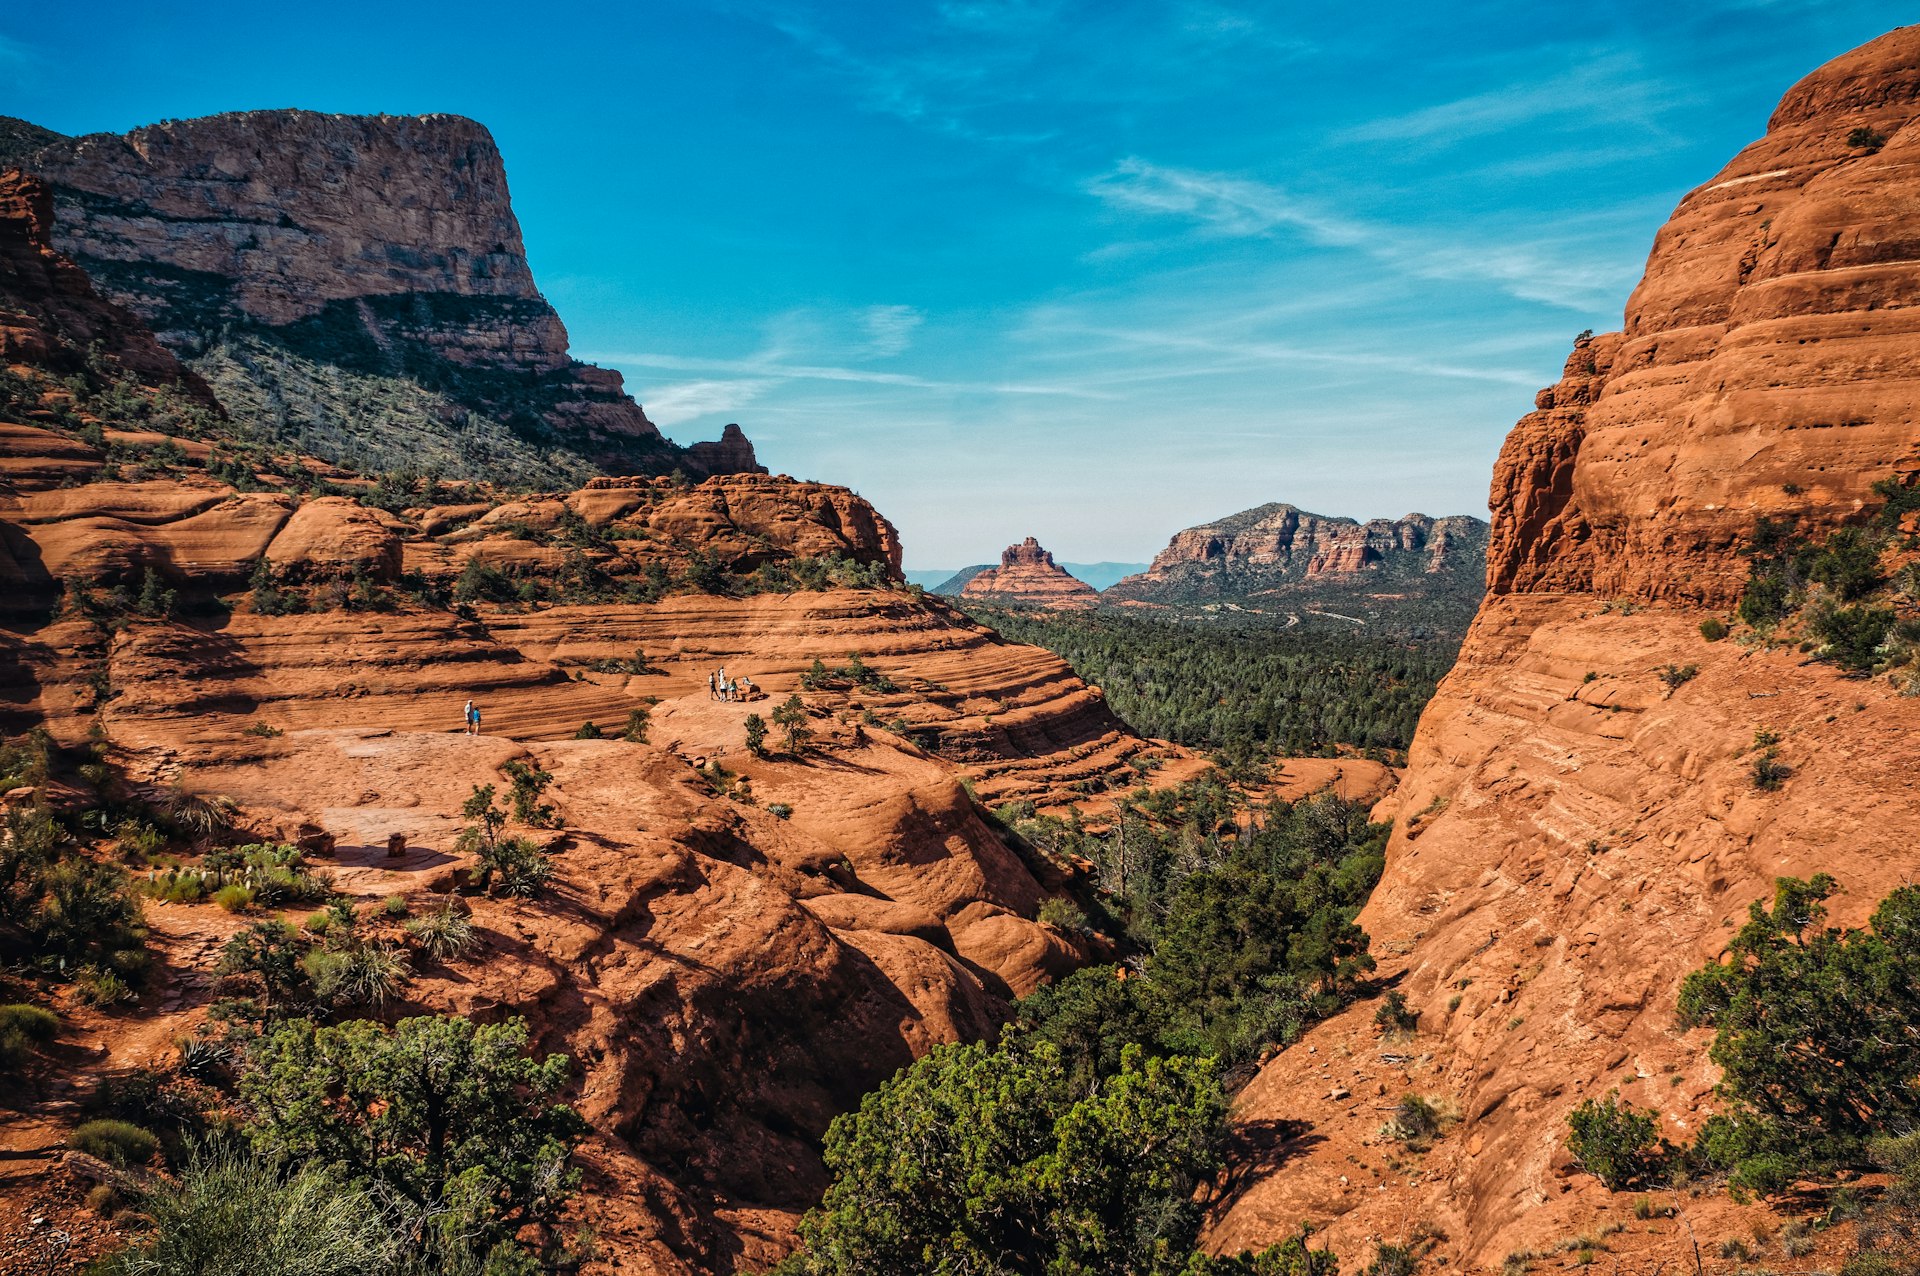 500px Photo ID: 91295713 - Taken while hiking the red rocks of Sedona. One of my favorite spots on the earth.